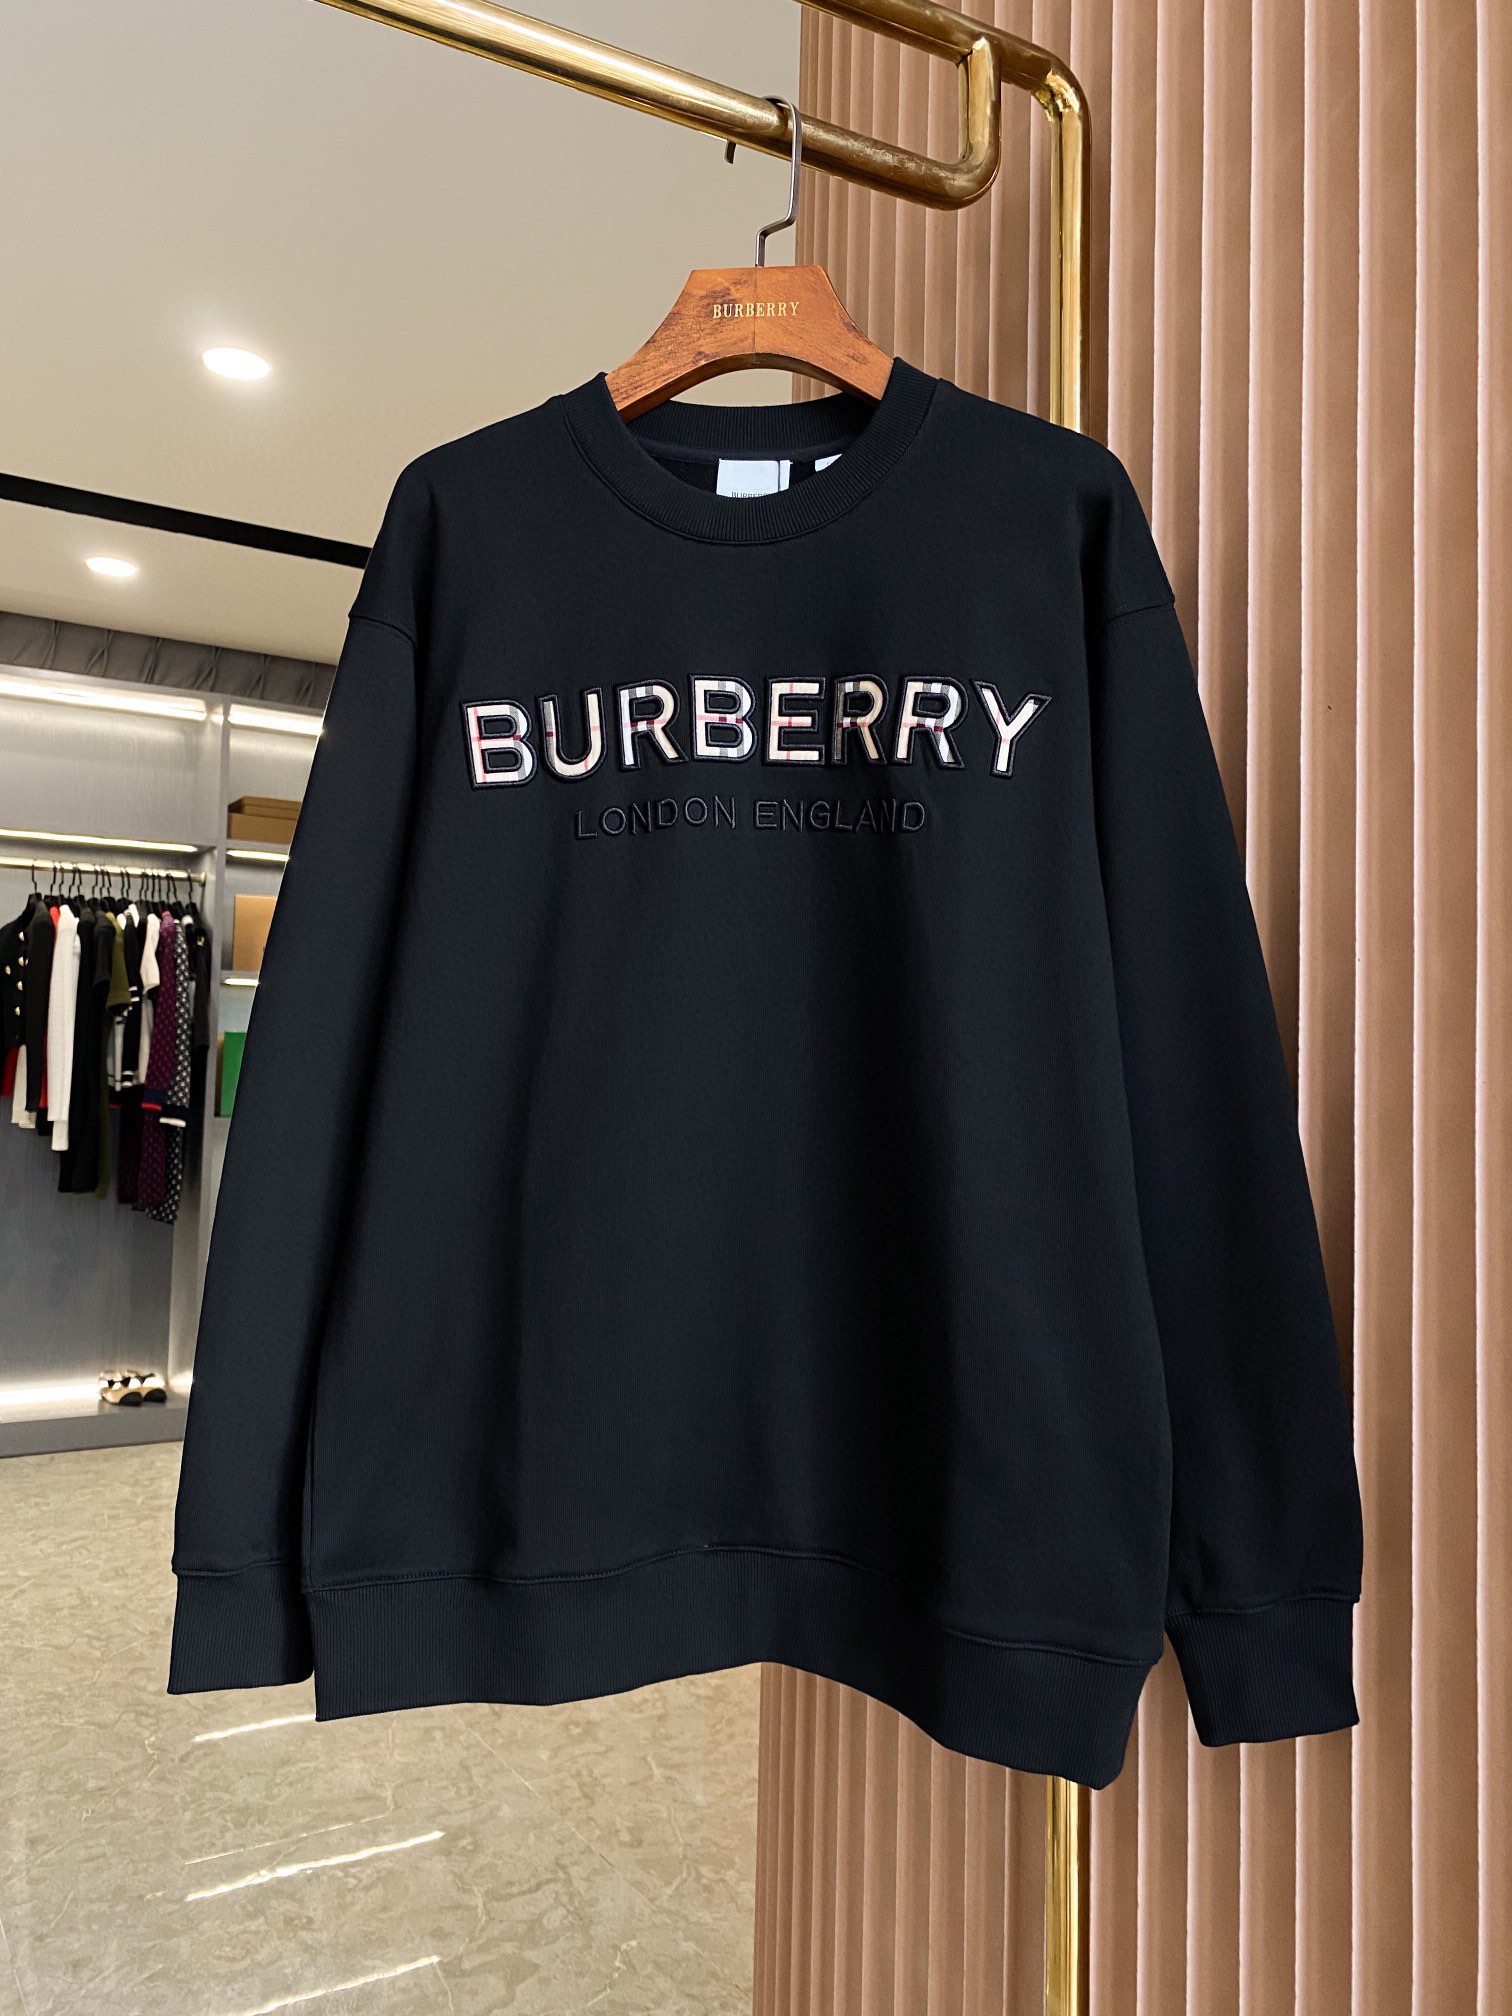 Burberry Clothing Sweatshirts Embroidery Unisex Cotton Fall/Winter Collection Fashion